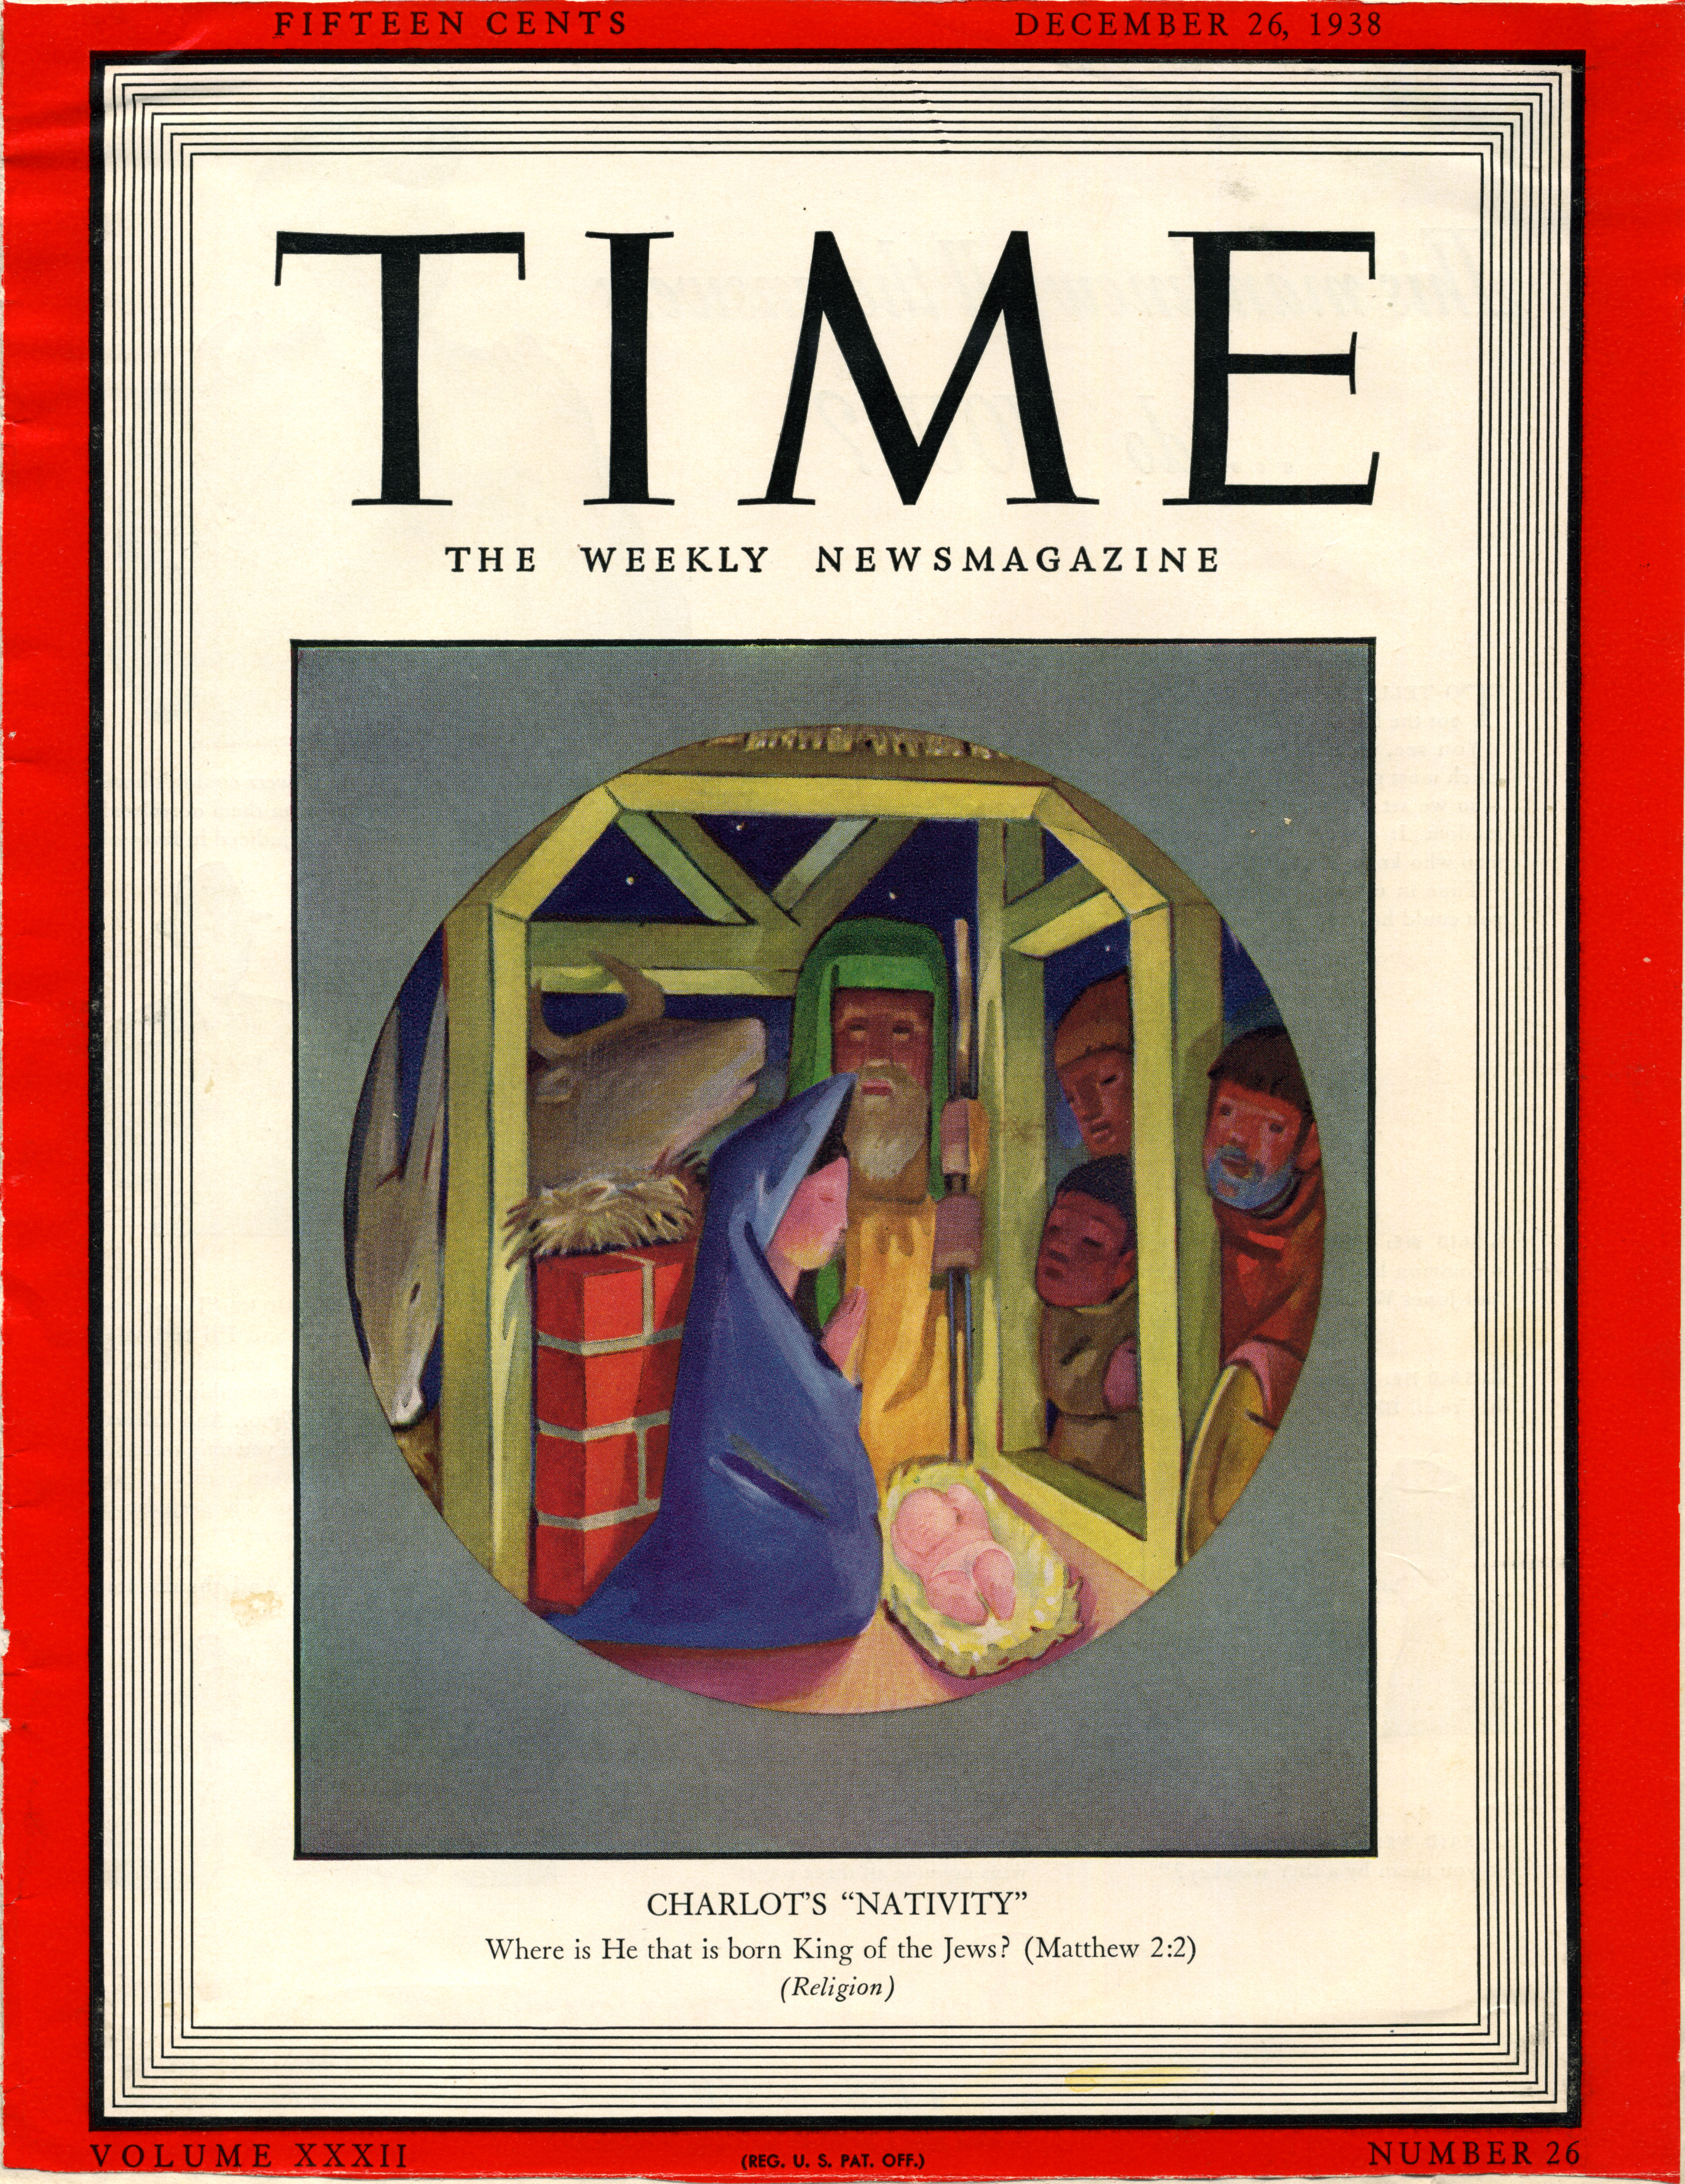 Cover of TIME: the weekly newsmagazine.  1938 December 26.  Nativity.  Jean Charlot.